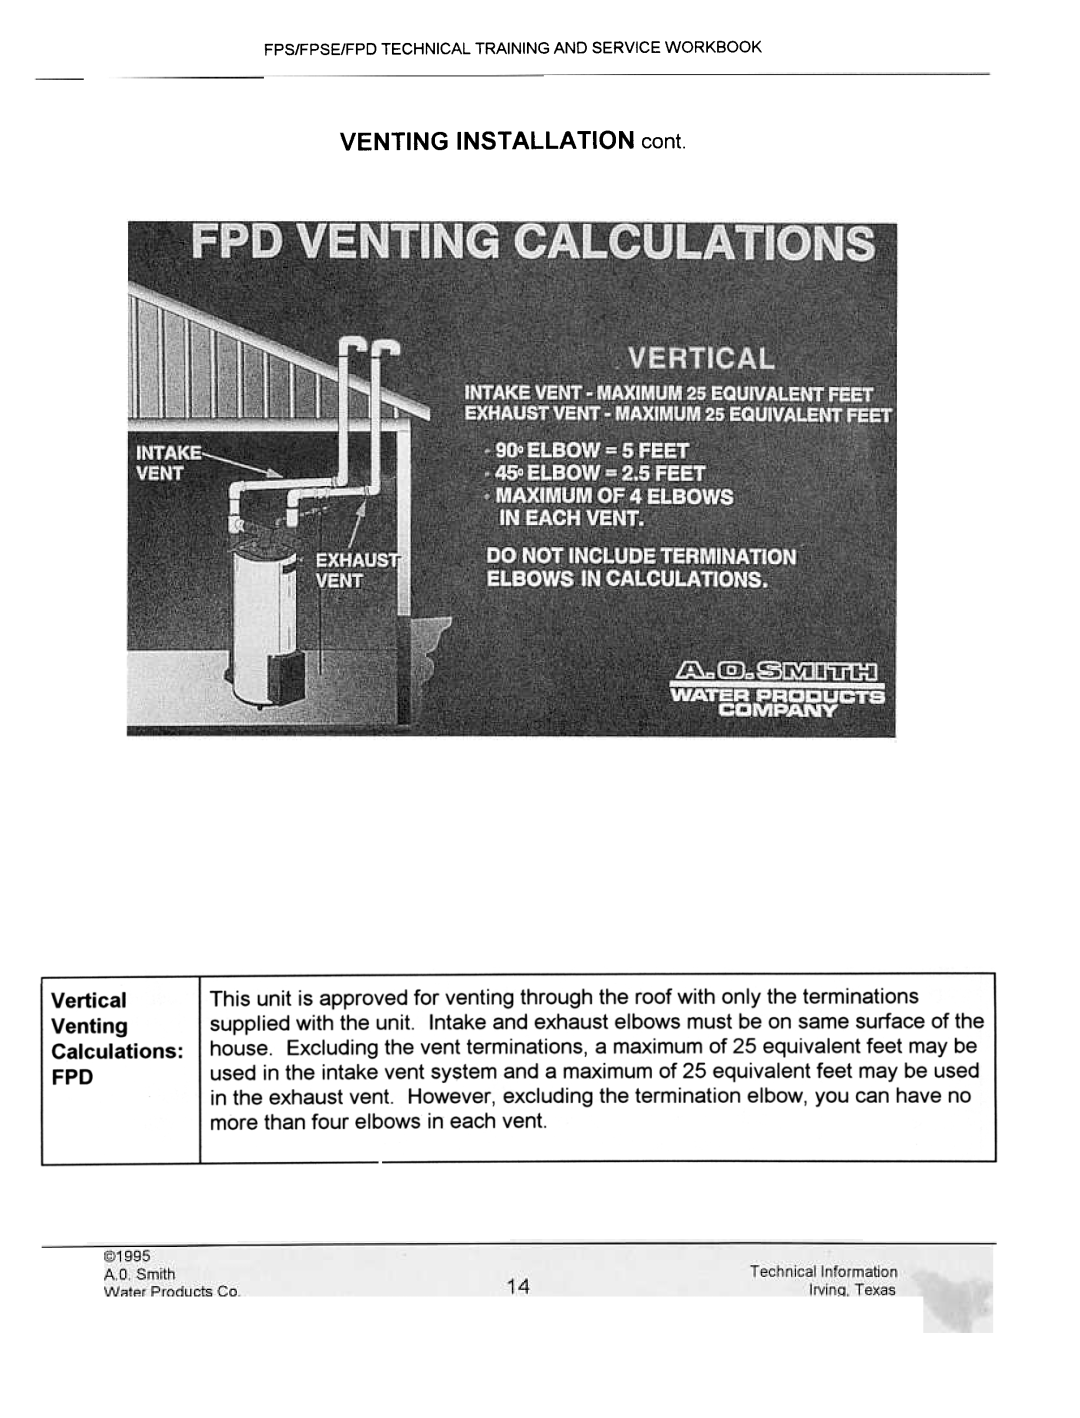 A.O. Smith FPS 75, FPSE50, fps50, FPS40 manual VENTING INSTALLATION cant, Fps/Fpse/Fpd Technical Training And Service Workbook 